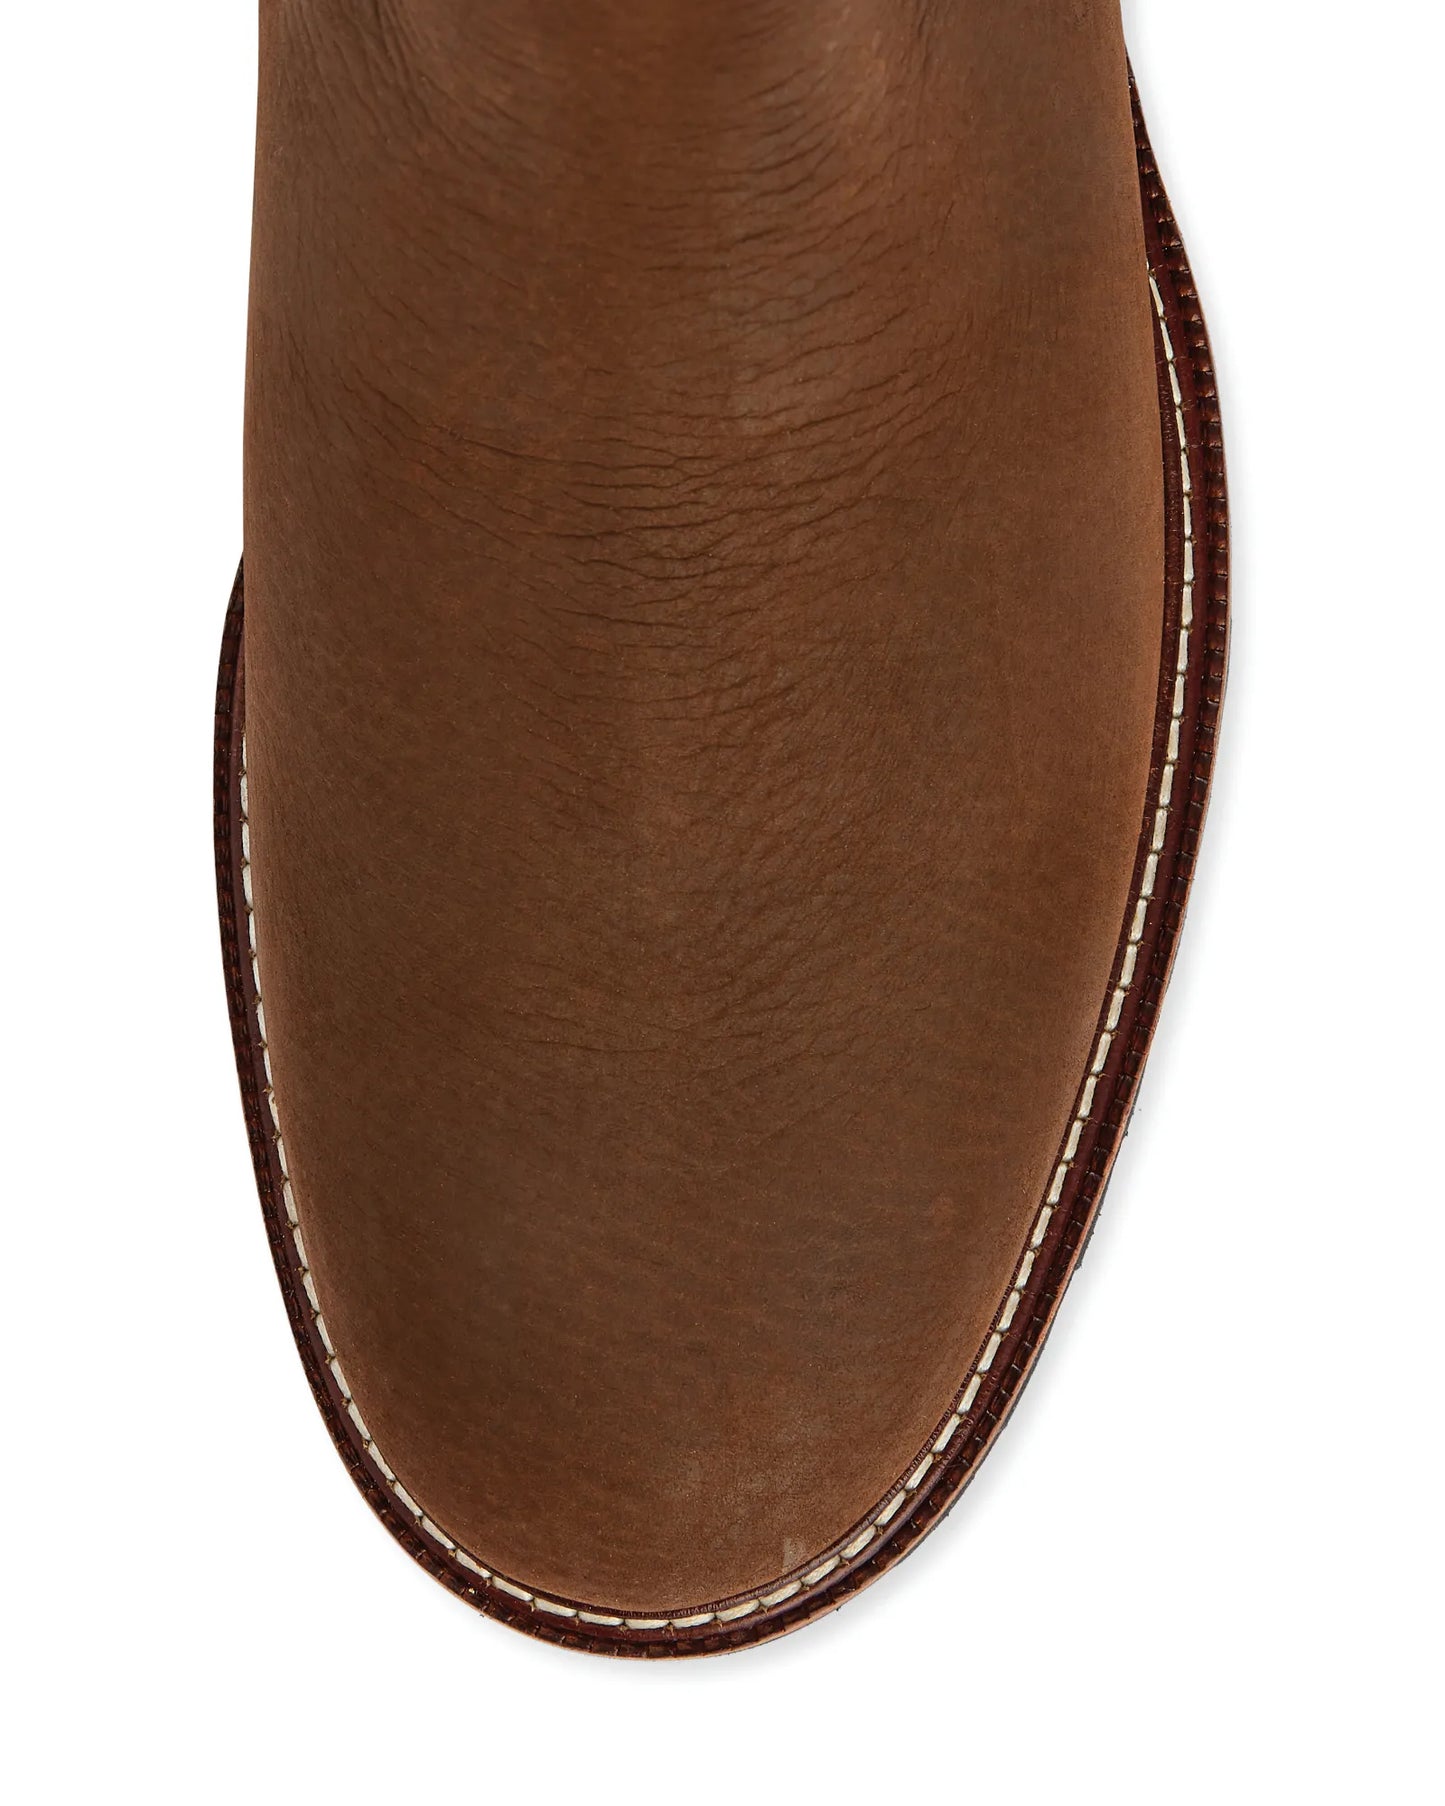 Offaly Boot - Walnut